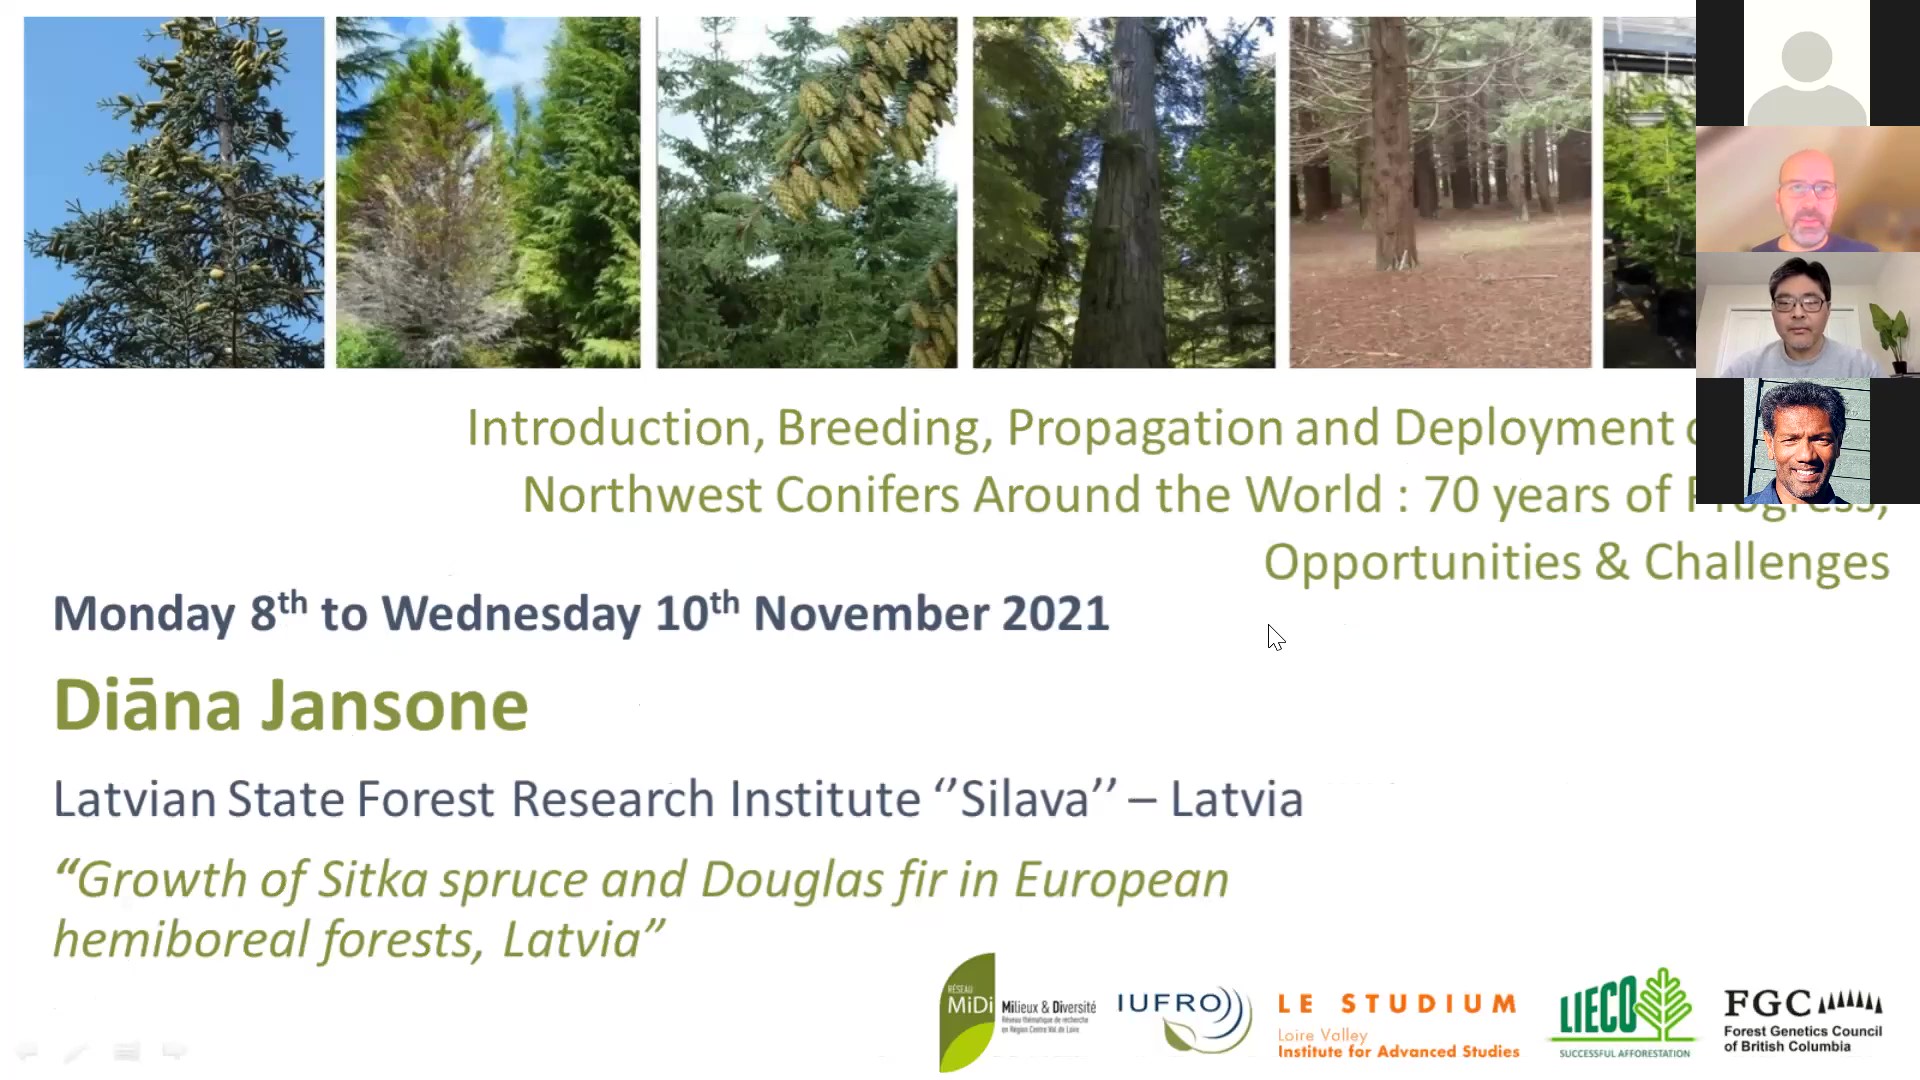 Growth of Sitka Spruce and Douglas Fir in European hemiboreal forests, Latvia - Diāna Jansone